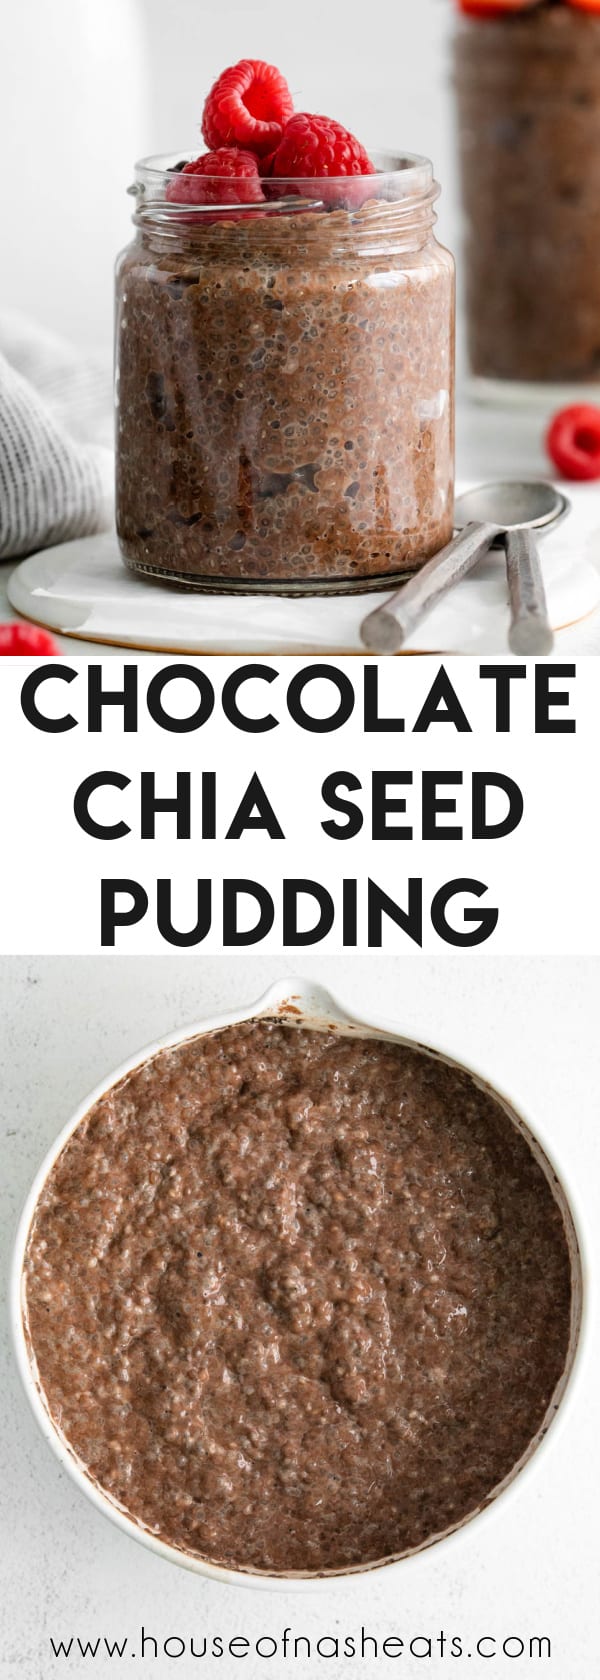 A collage of images of chocolate chia seed pudding with text overlay.